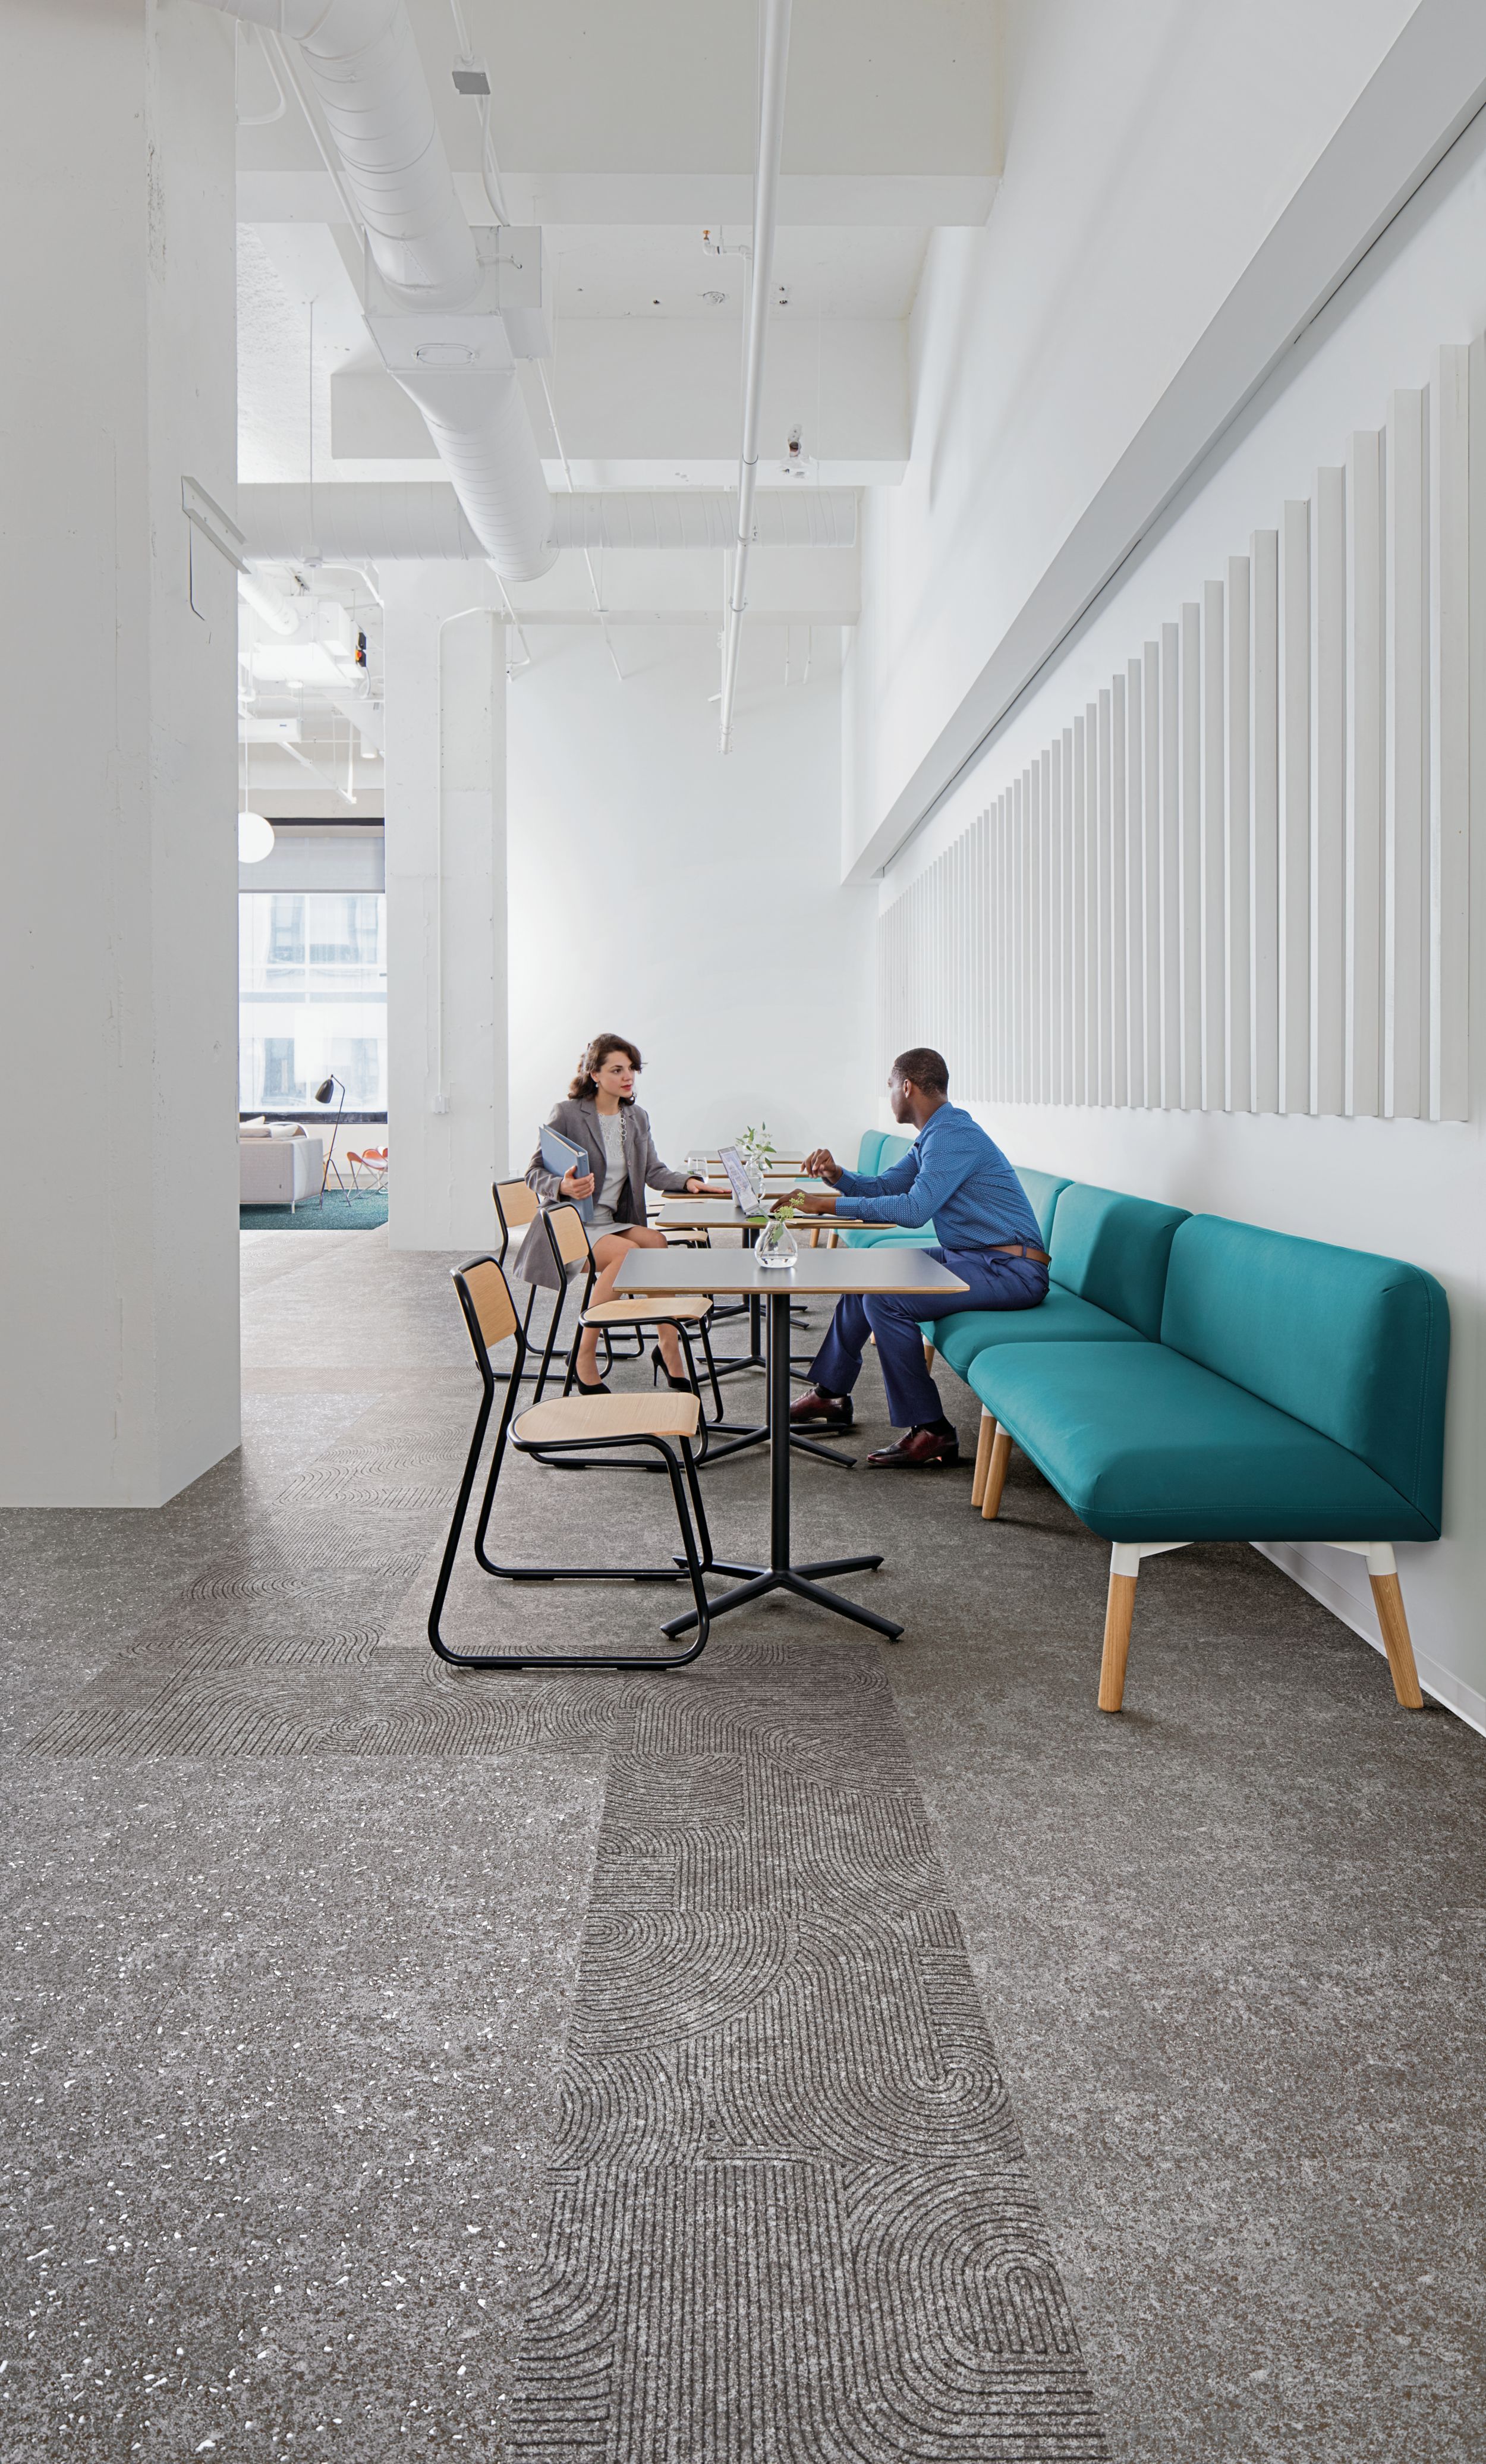 Interface Walk of Life, Walk About and Walk the Aisle LVT in an office break area numéro d’image 10